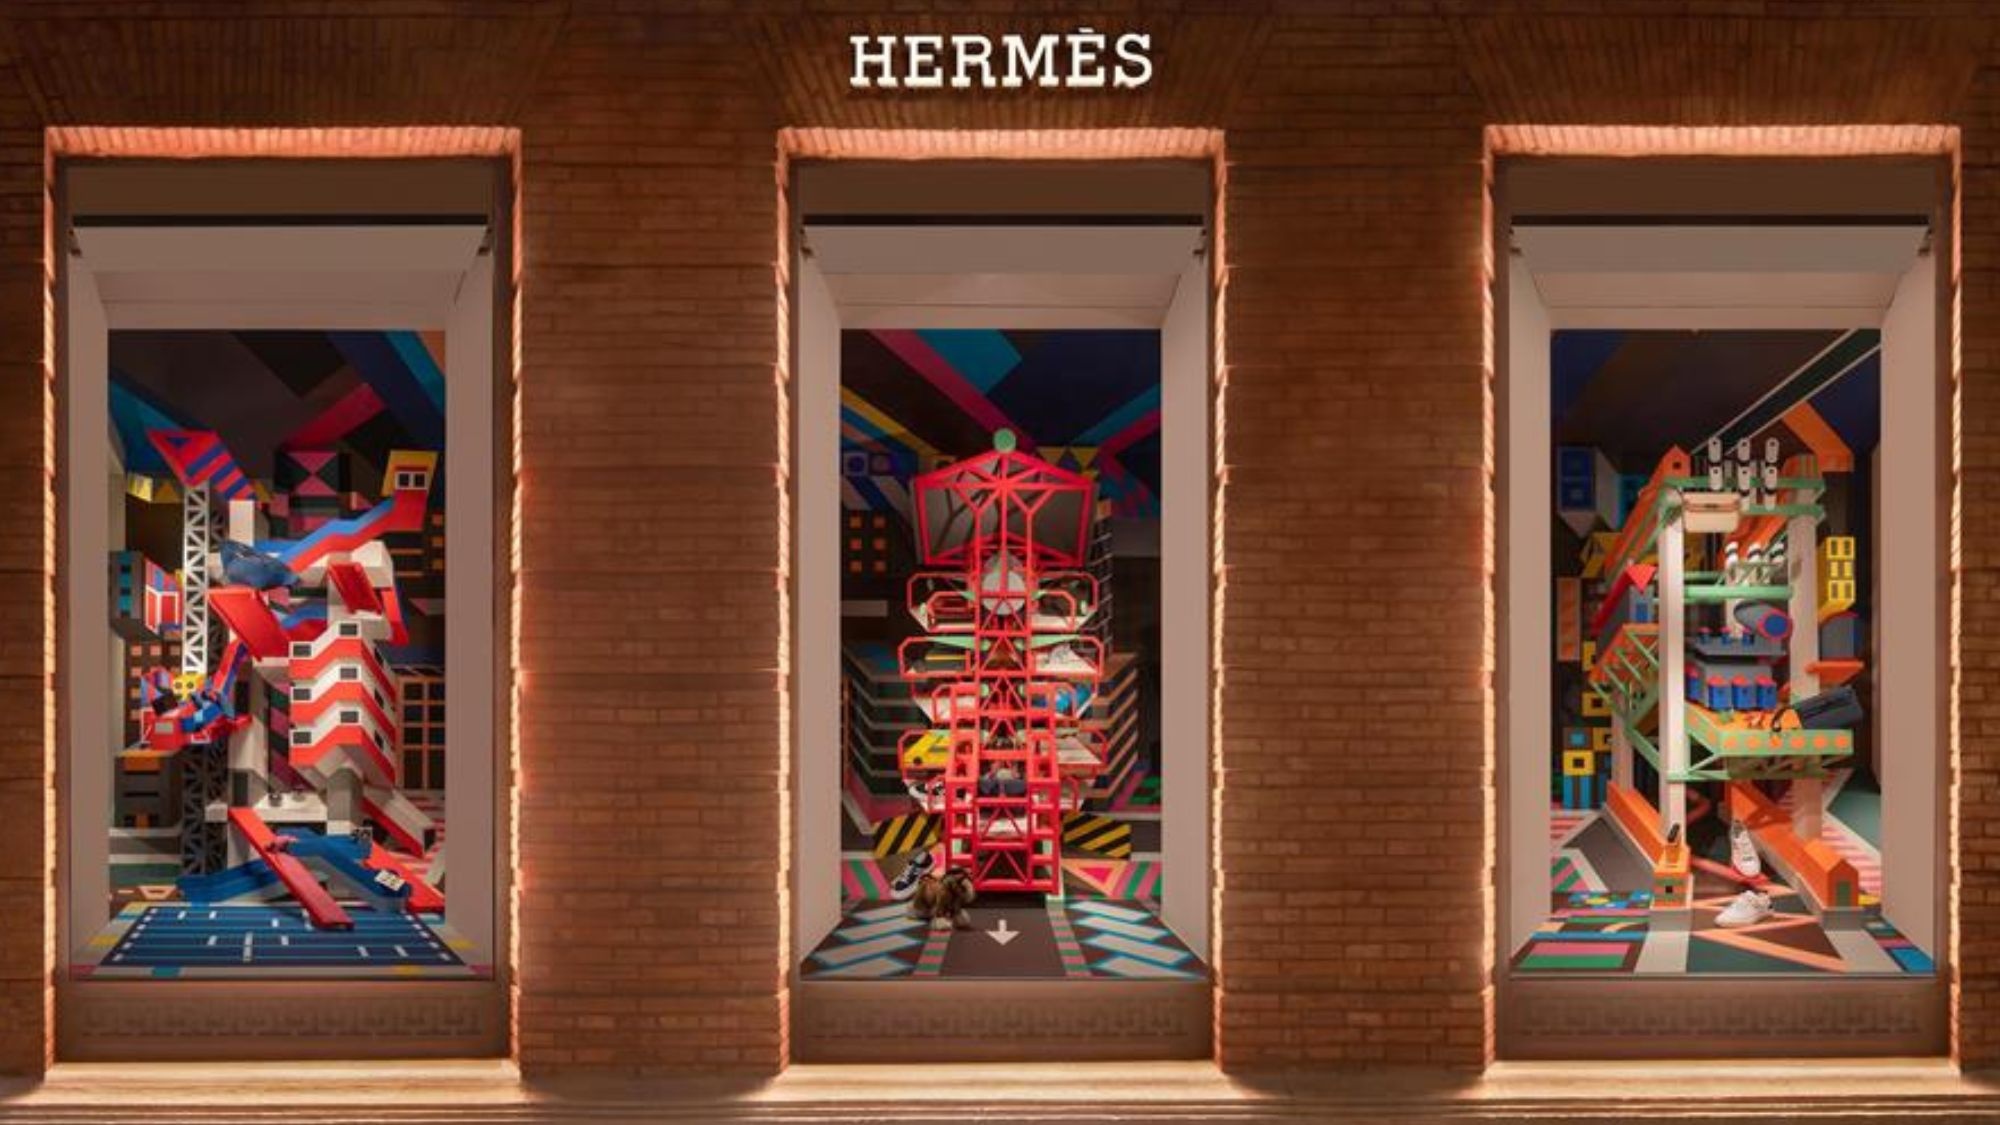 The window display which is currently at the Shanghai Hermès Maison. Photo: Hermès